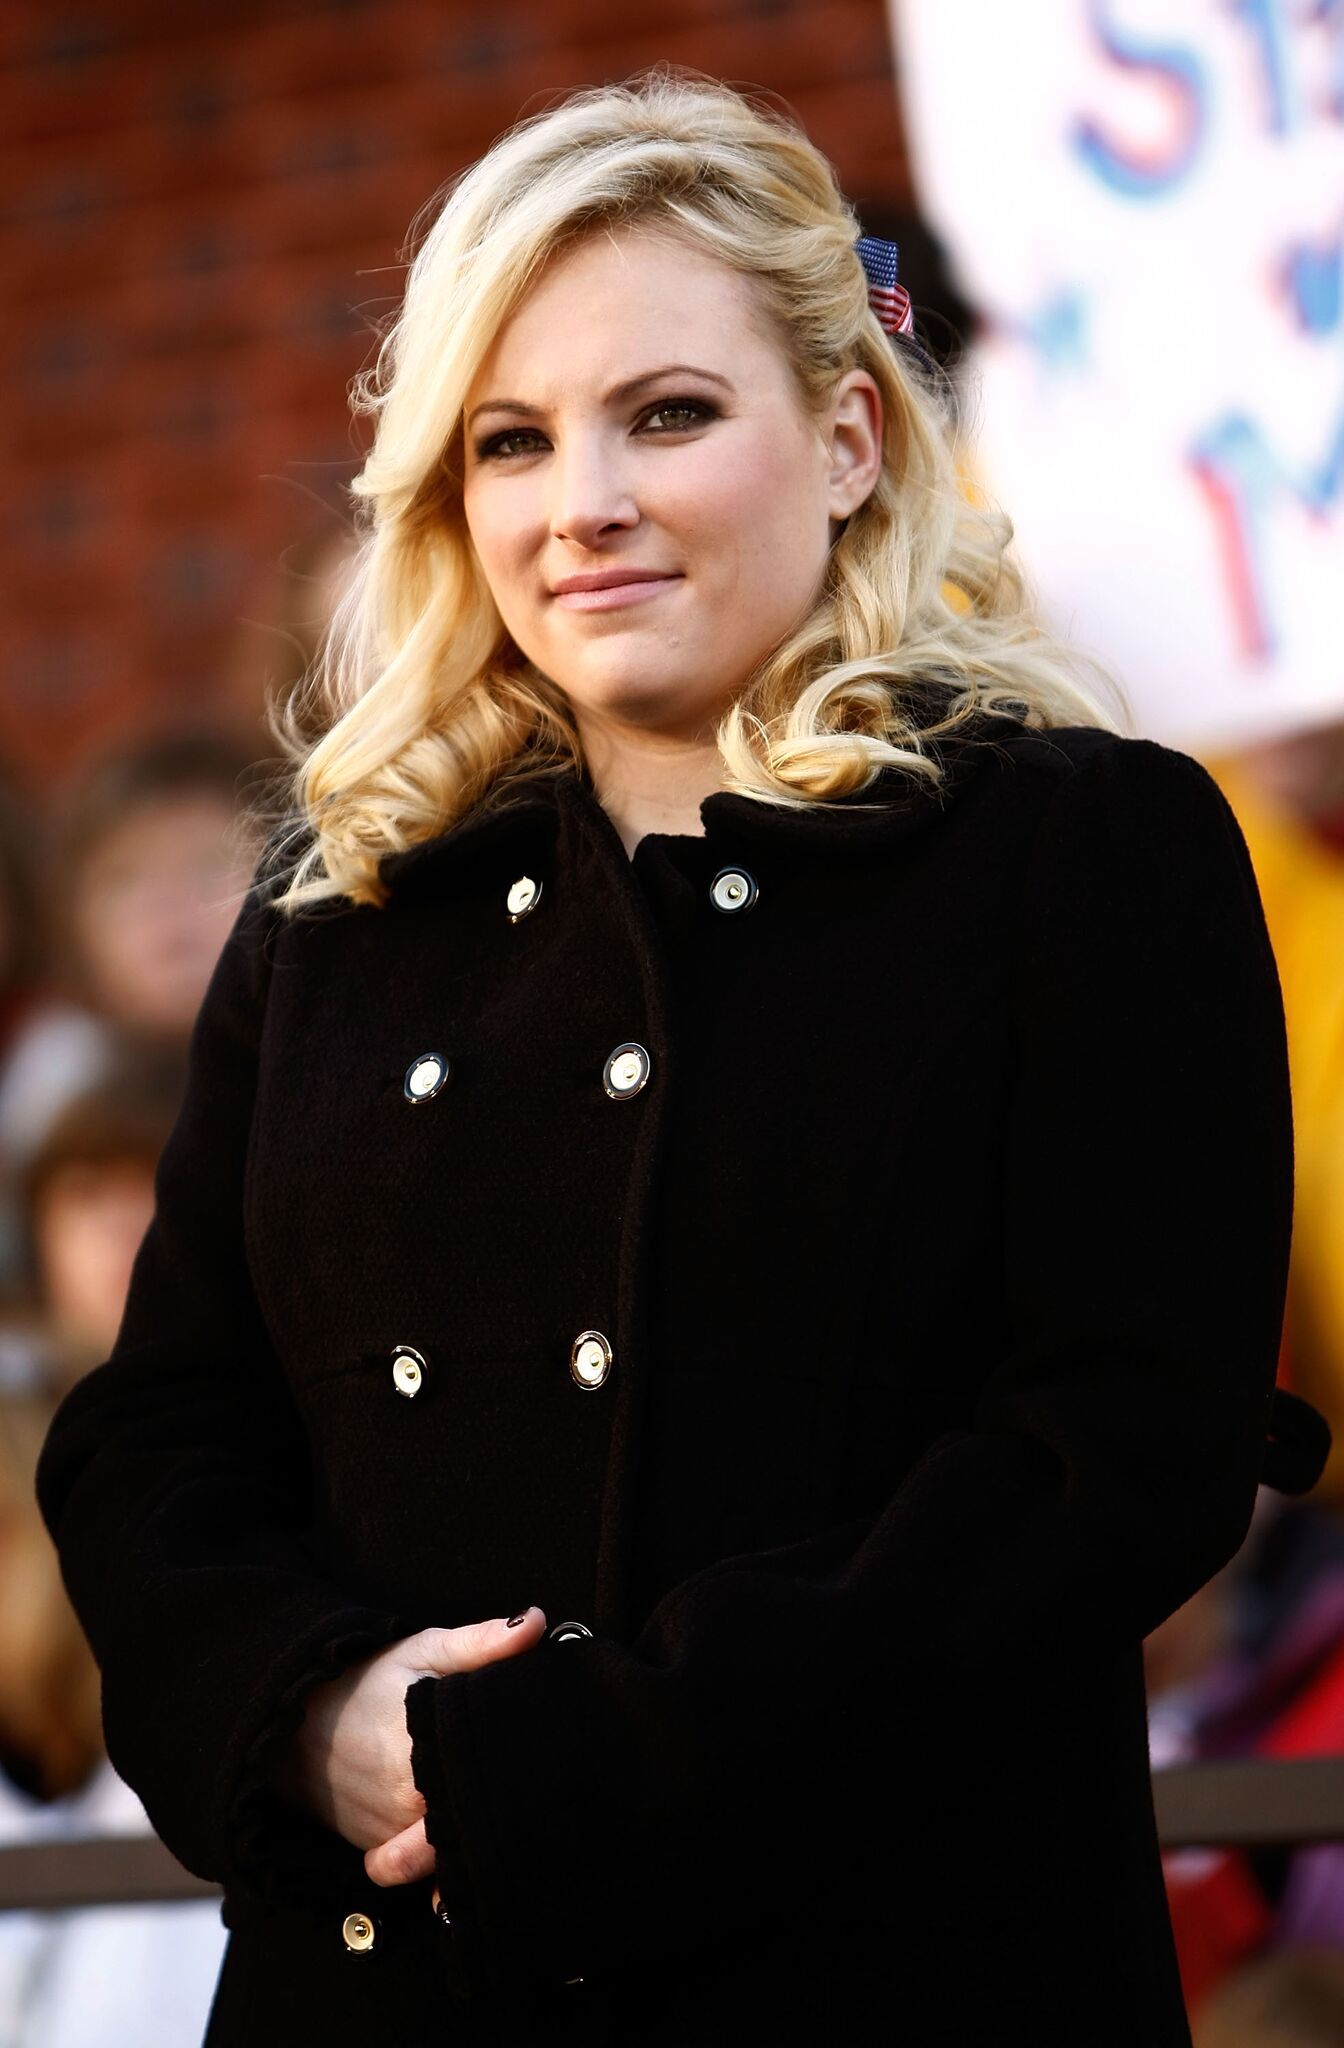 Meghan McCain attends a campaign rally at Defiance Junior High School October 30, 2008 | Photo: Getty Images